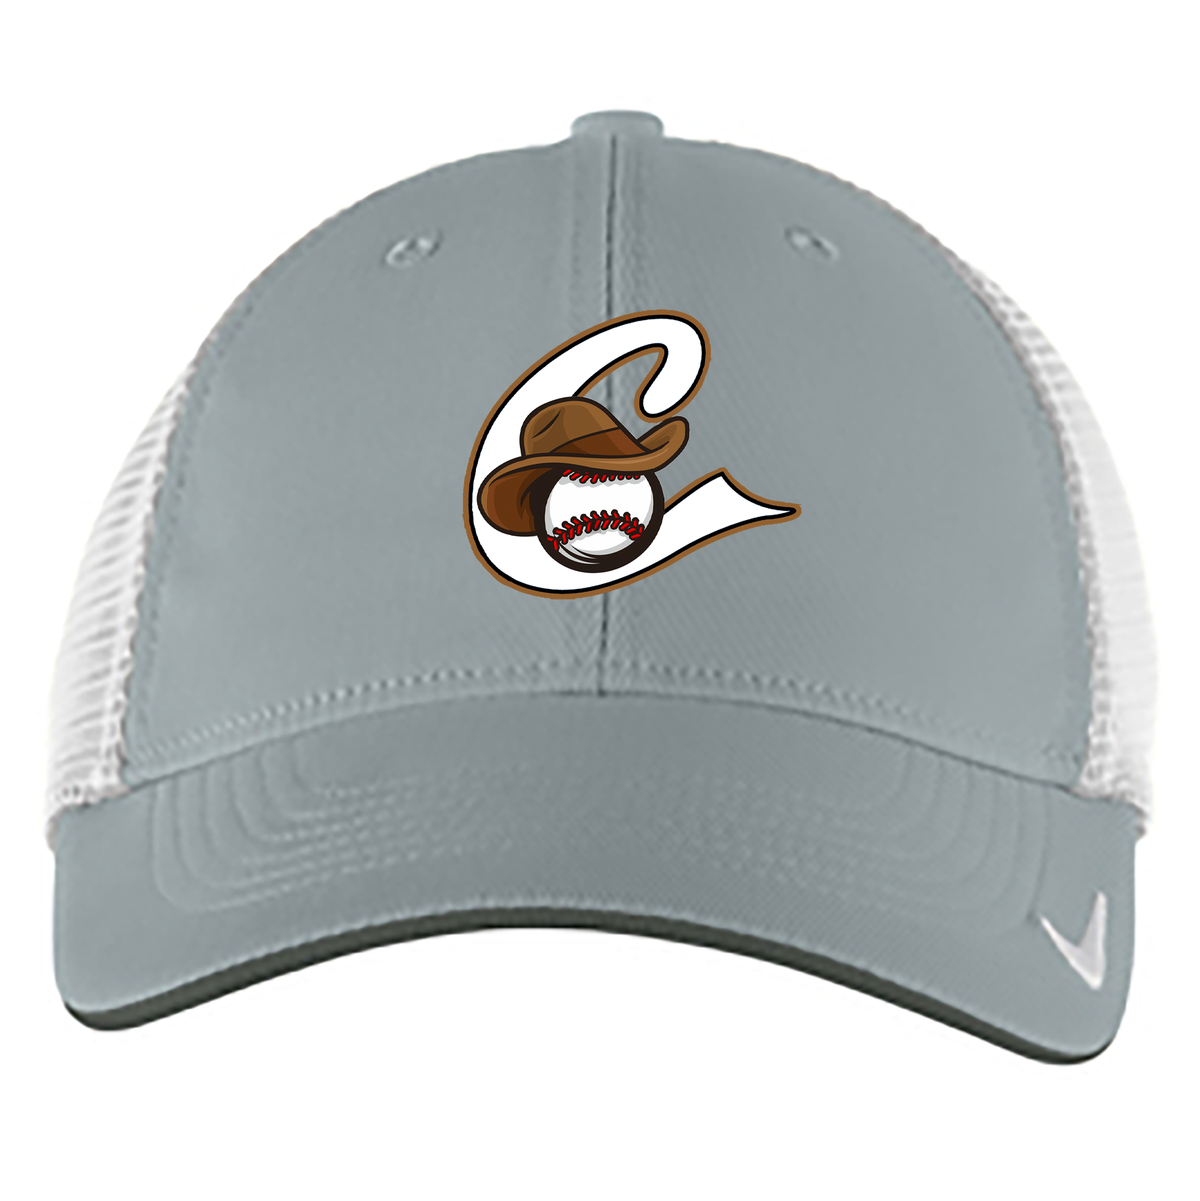 Caballeros Baseball Nike Stretch-to-Fit Mesh Back Cap